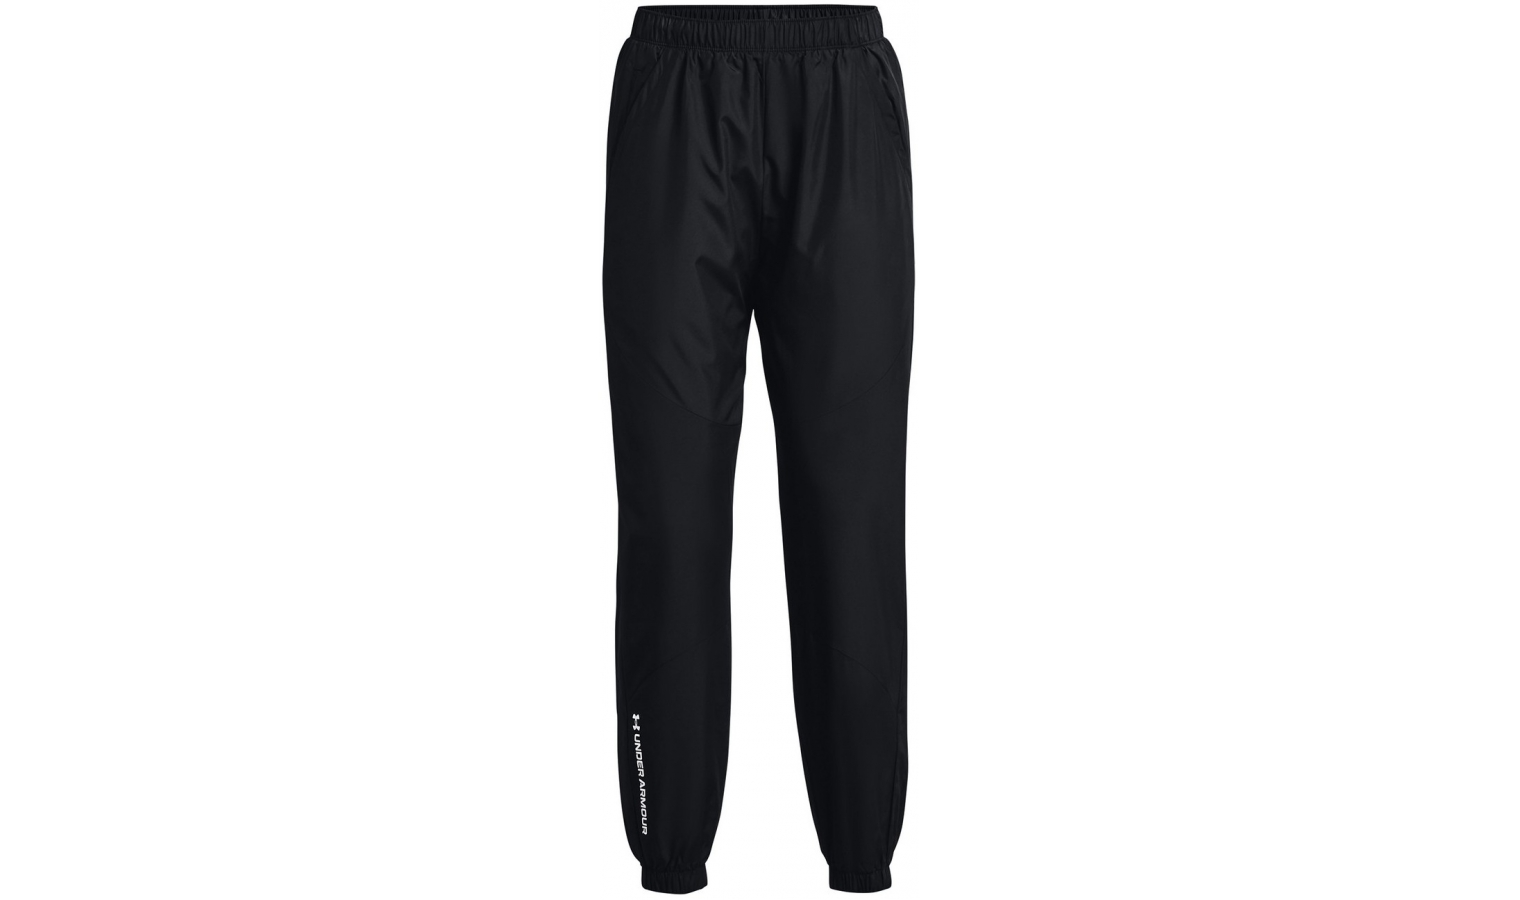 Womens sports pants Under Armour RUSH WOVEN PANT W black